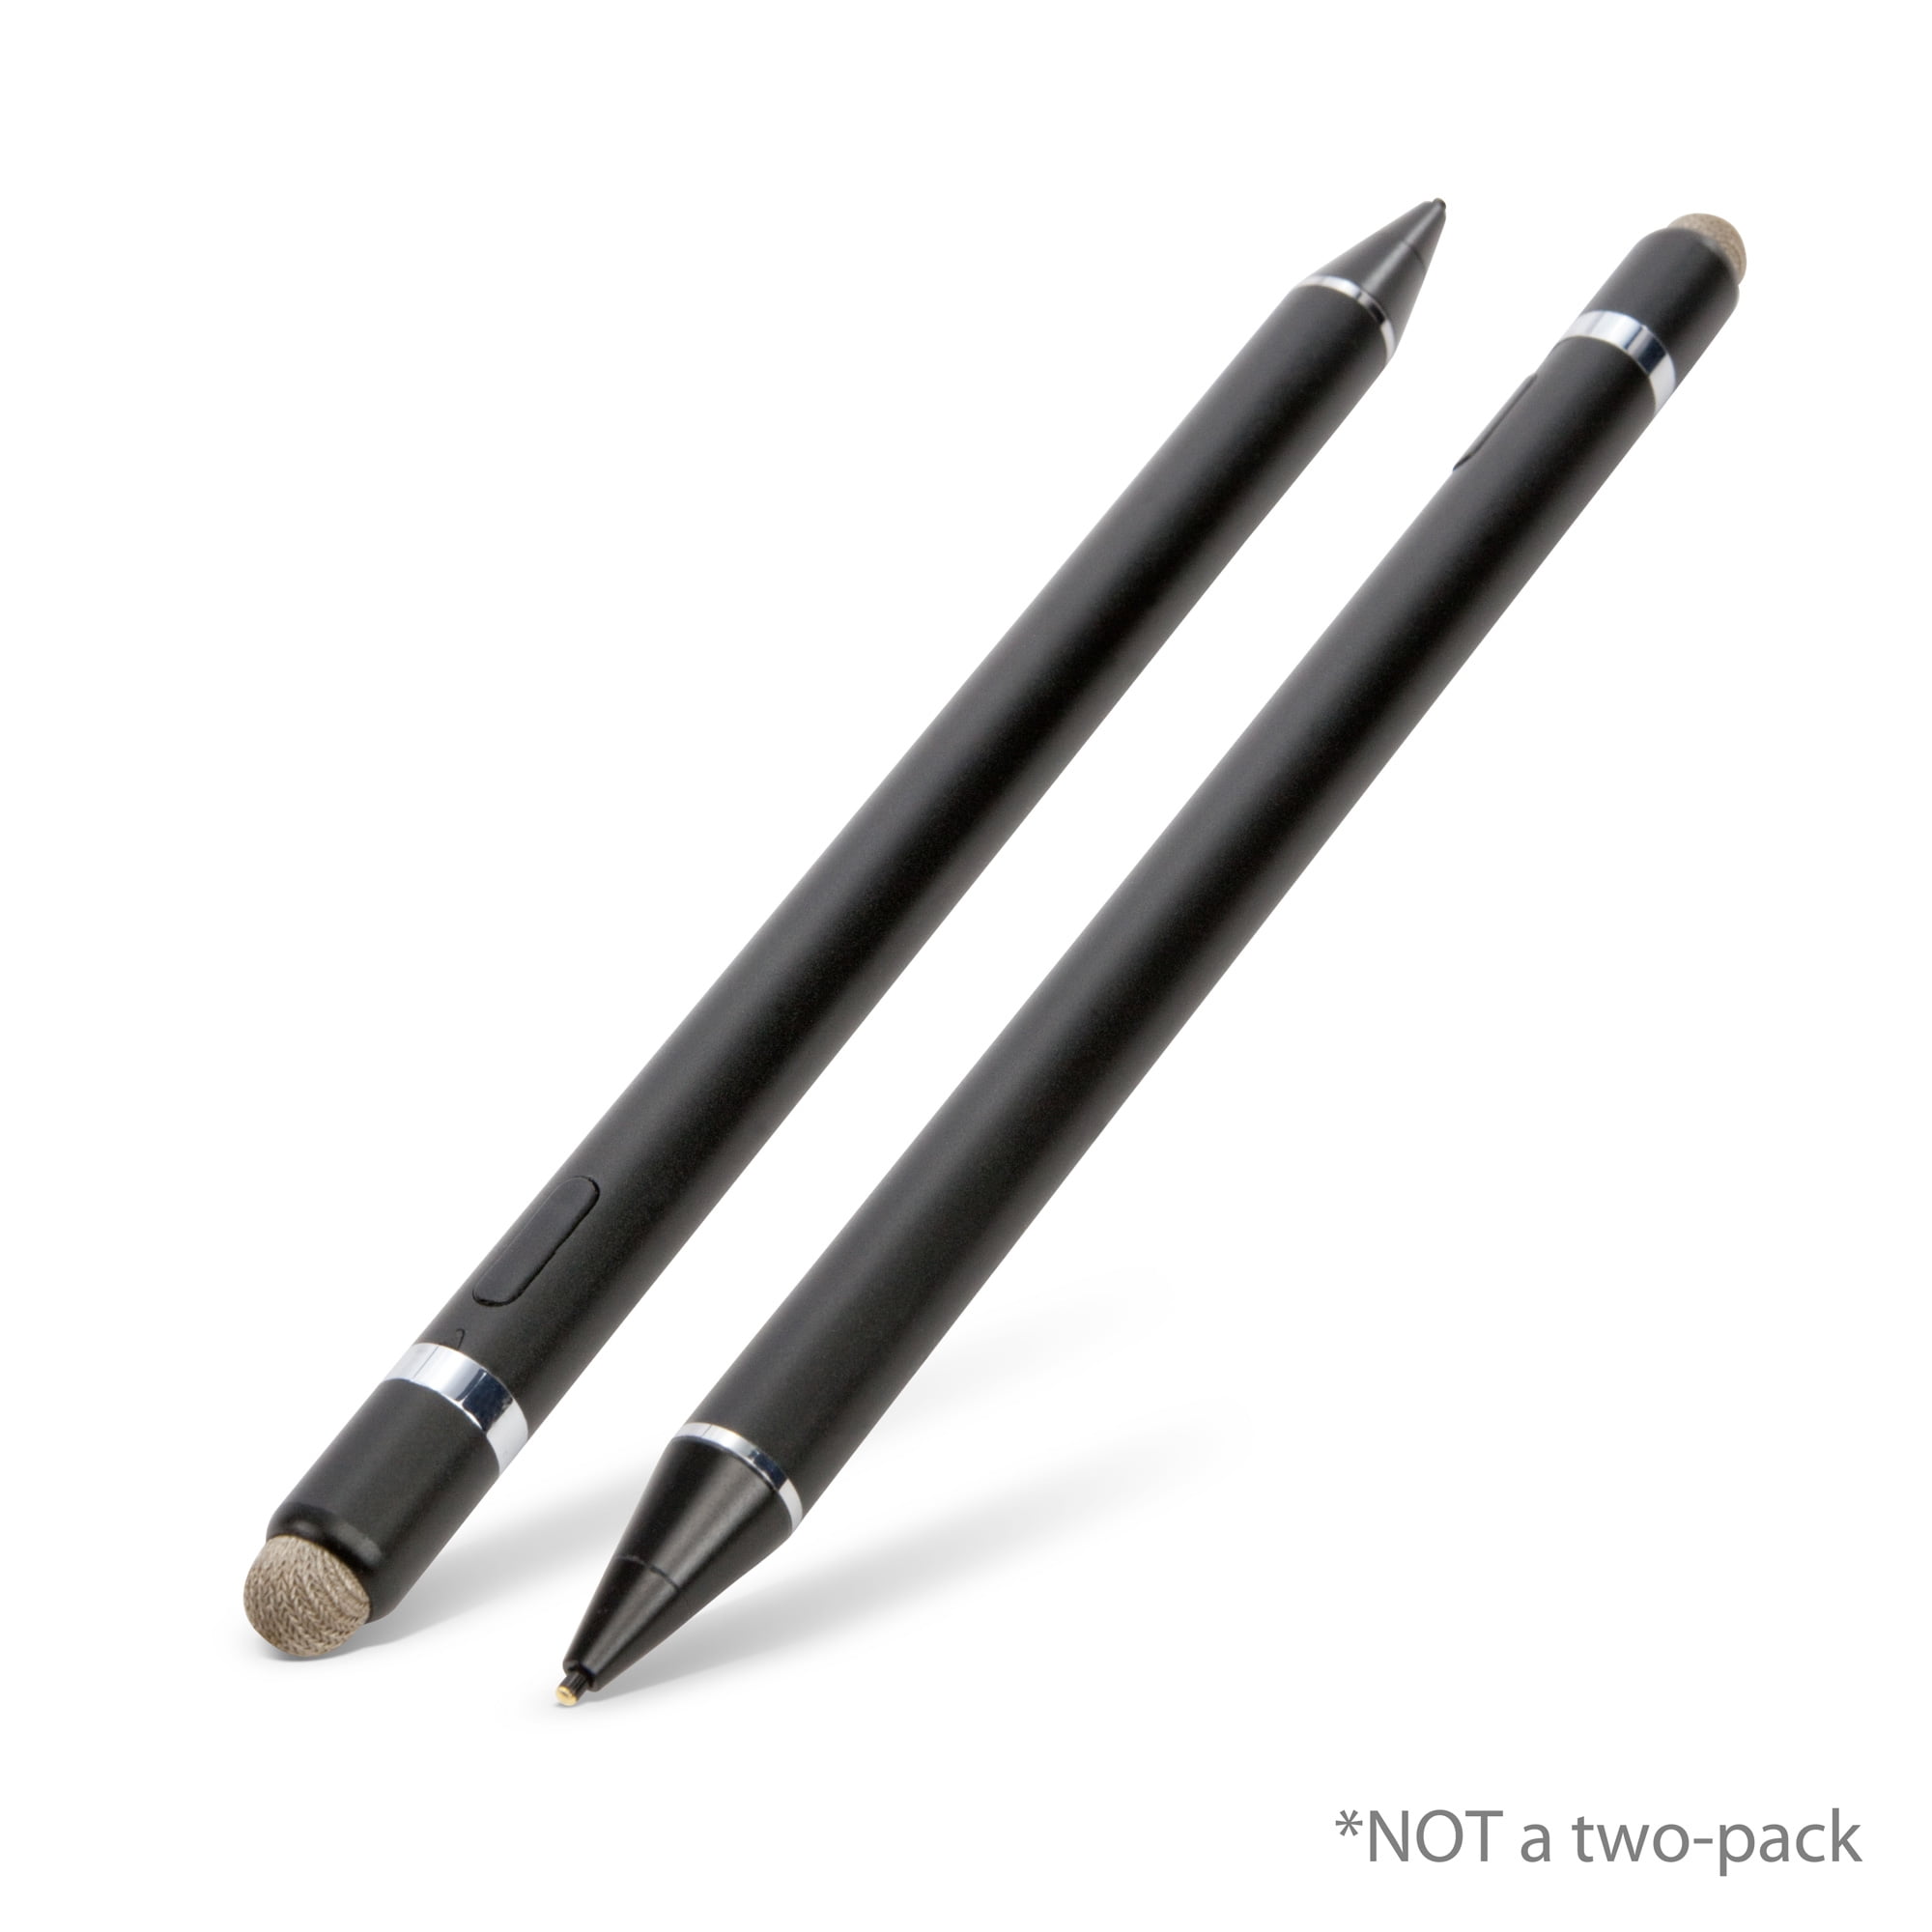 Compatible with YOTOPT 102 Tablet Broonel Grey Fine Point Digital Active Stylus Pen